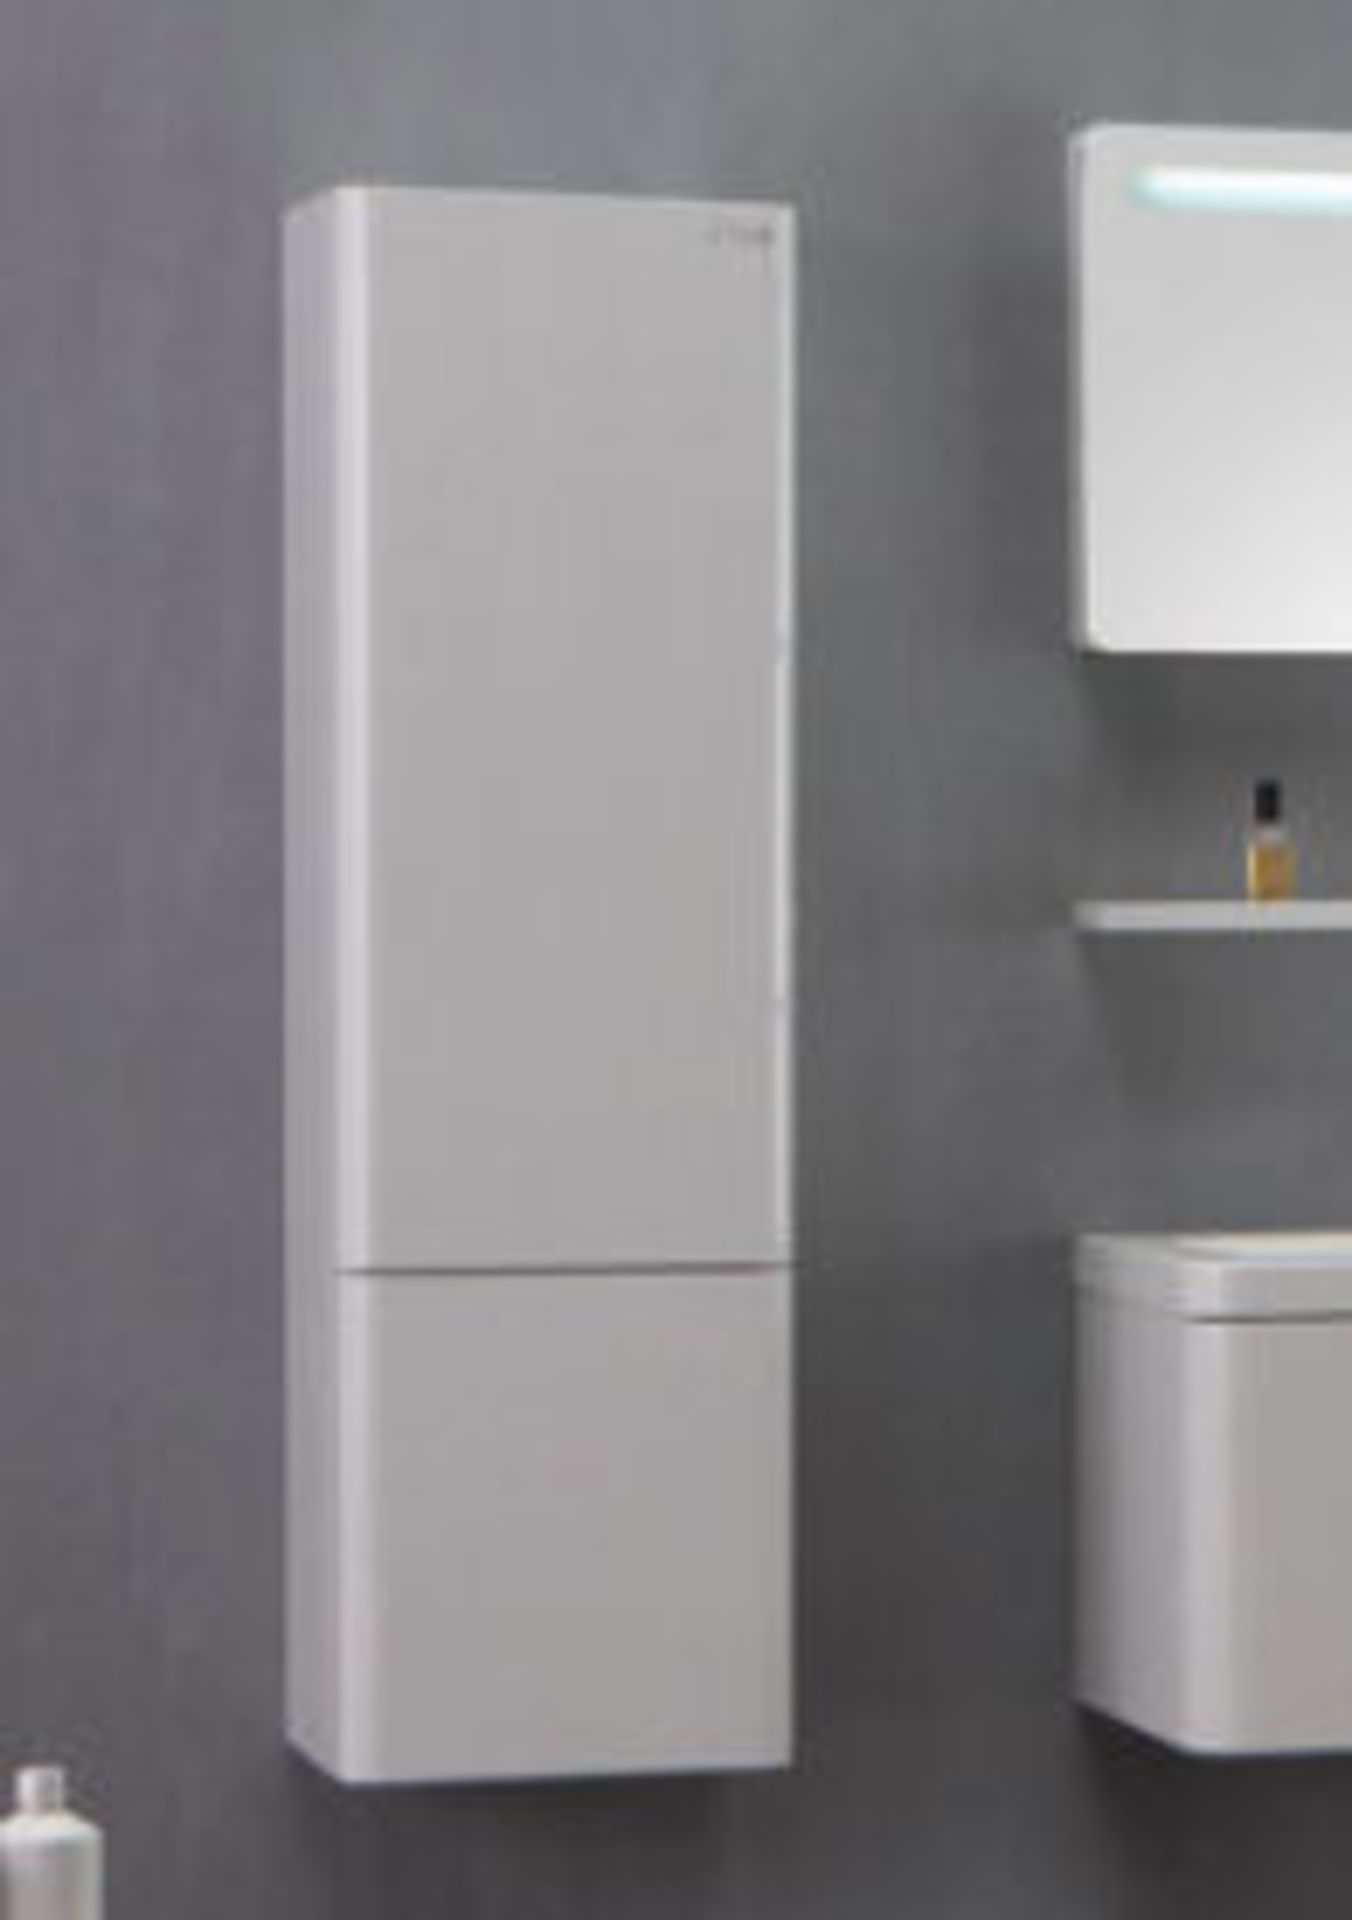 1 x White Gloss Storage Cabinet 120 - A-Grade - Ref:ASC42-120 - CL170 - Location: Nottingham NG2 - - Image 3 of 4